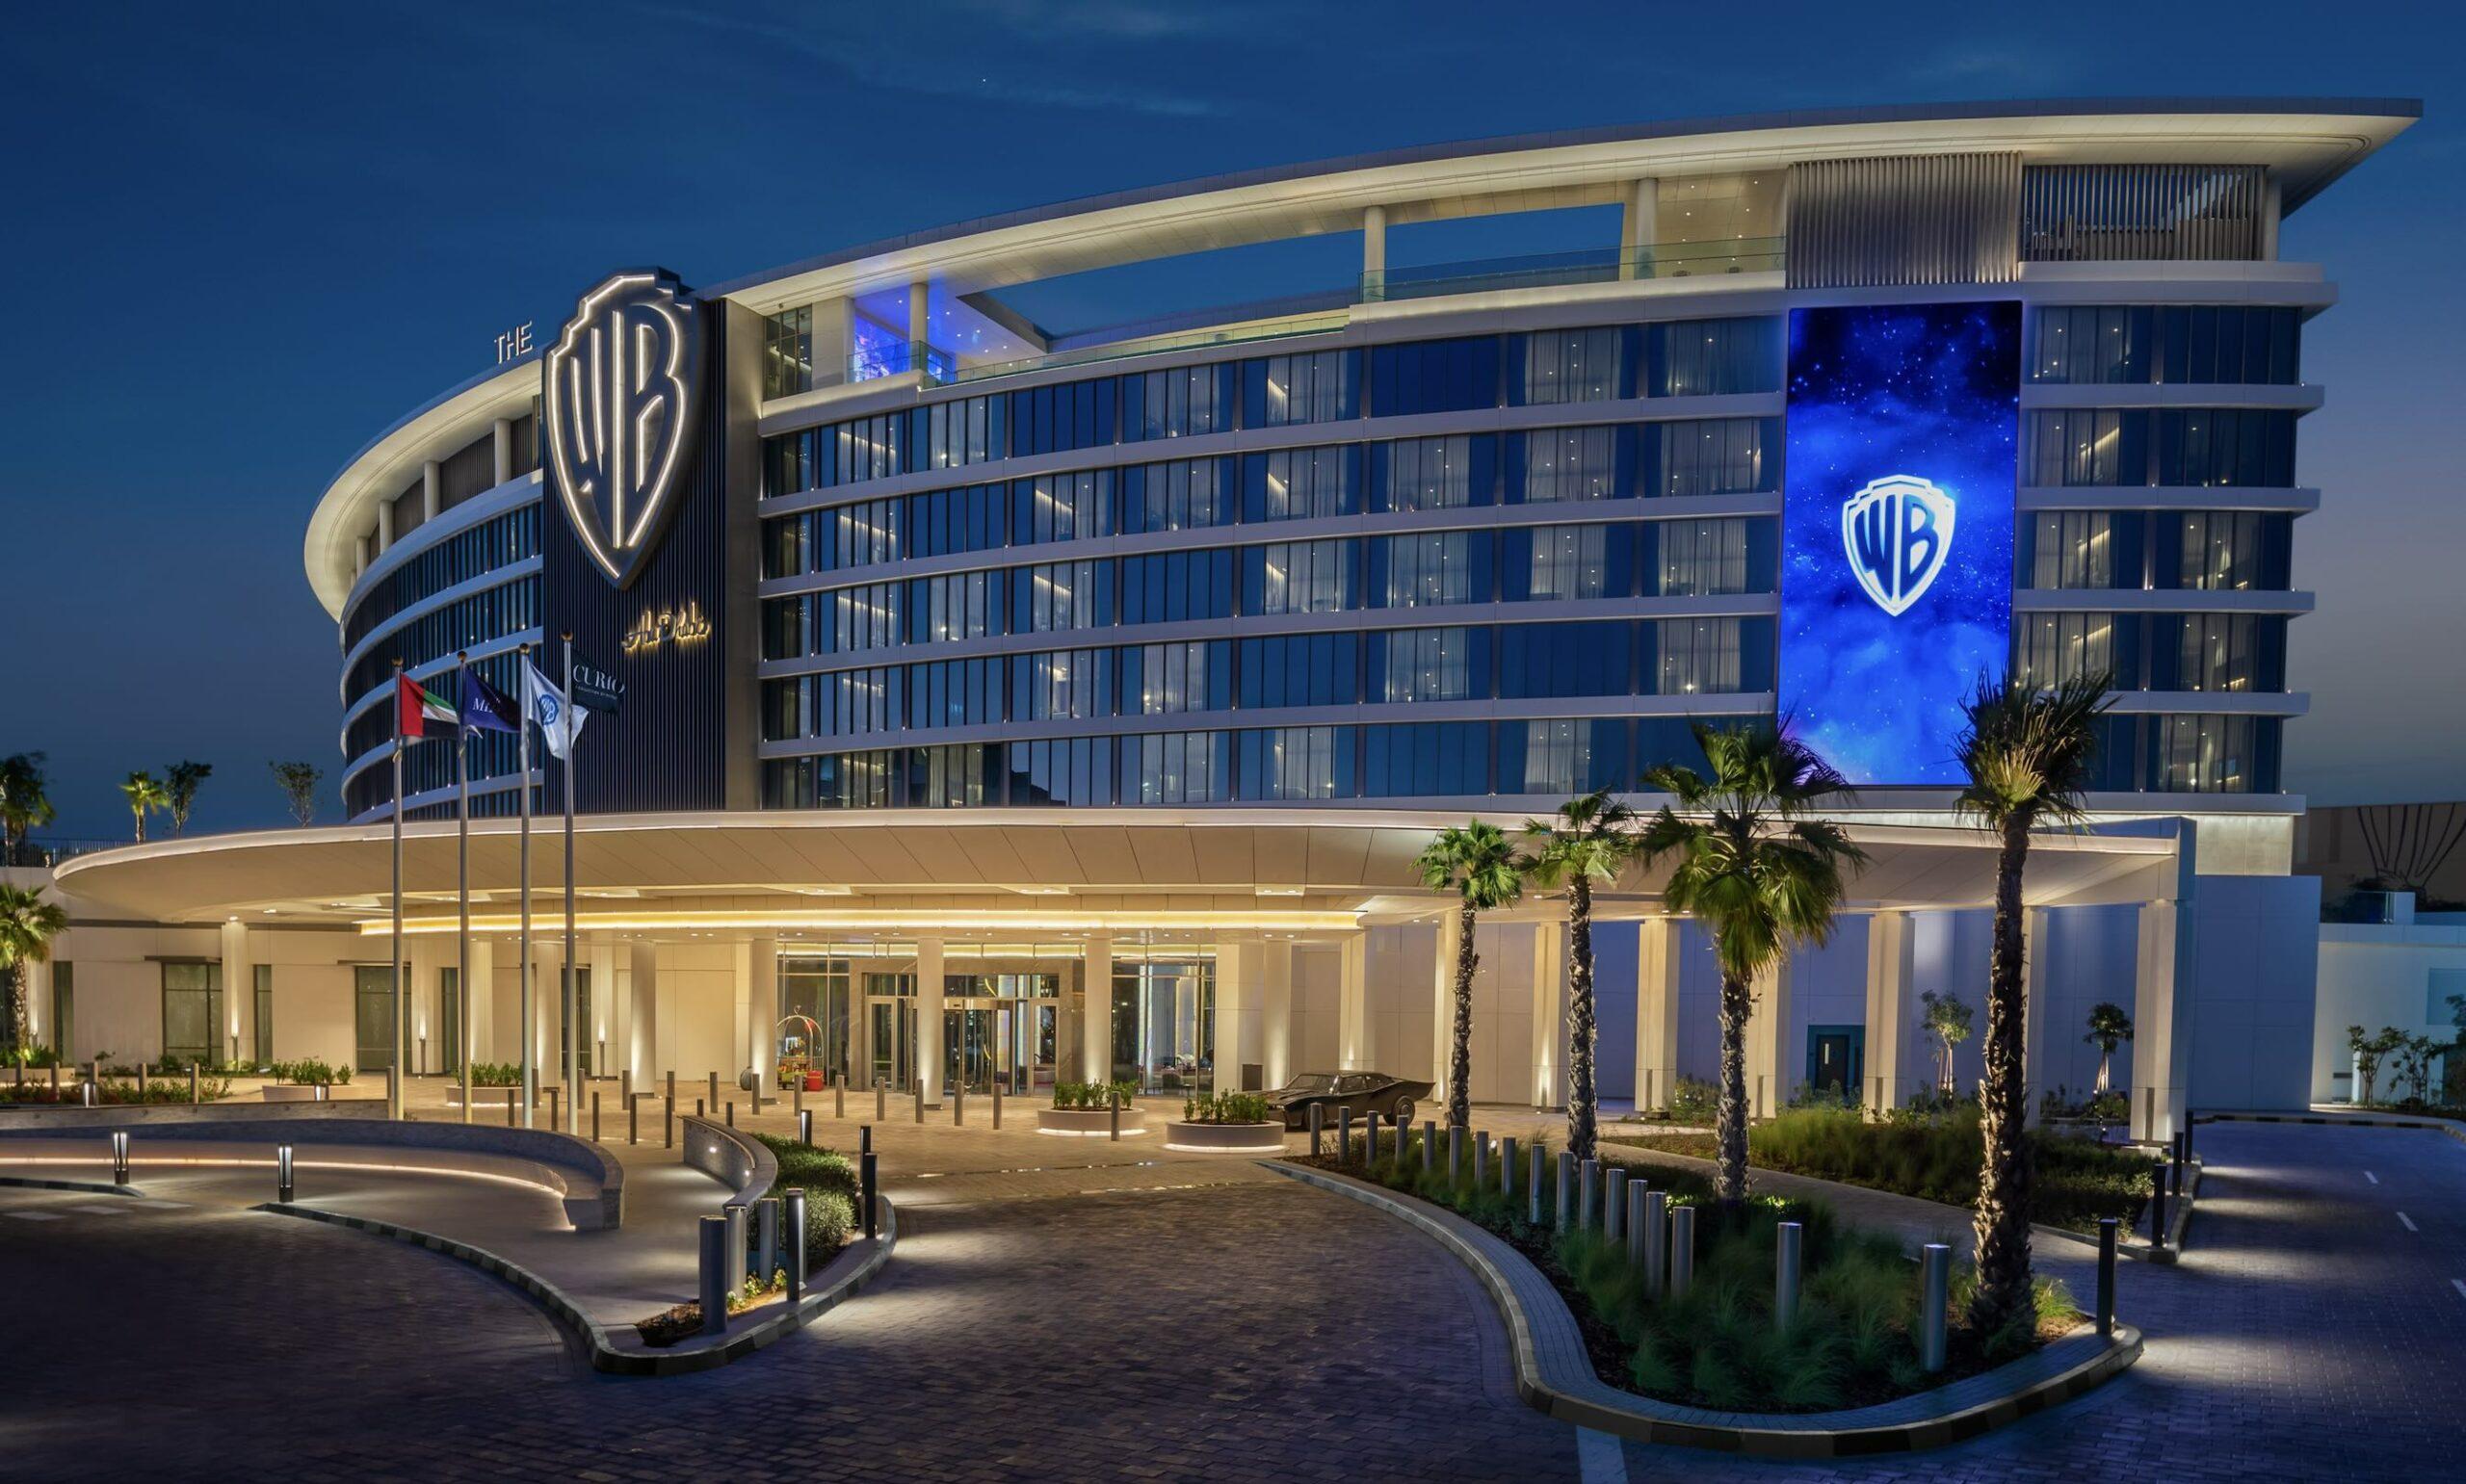 Escape into a world of fantasy at The WB™ Abu Dhabi-image